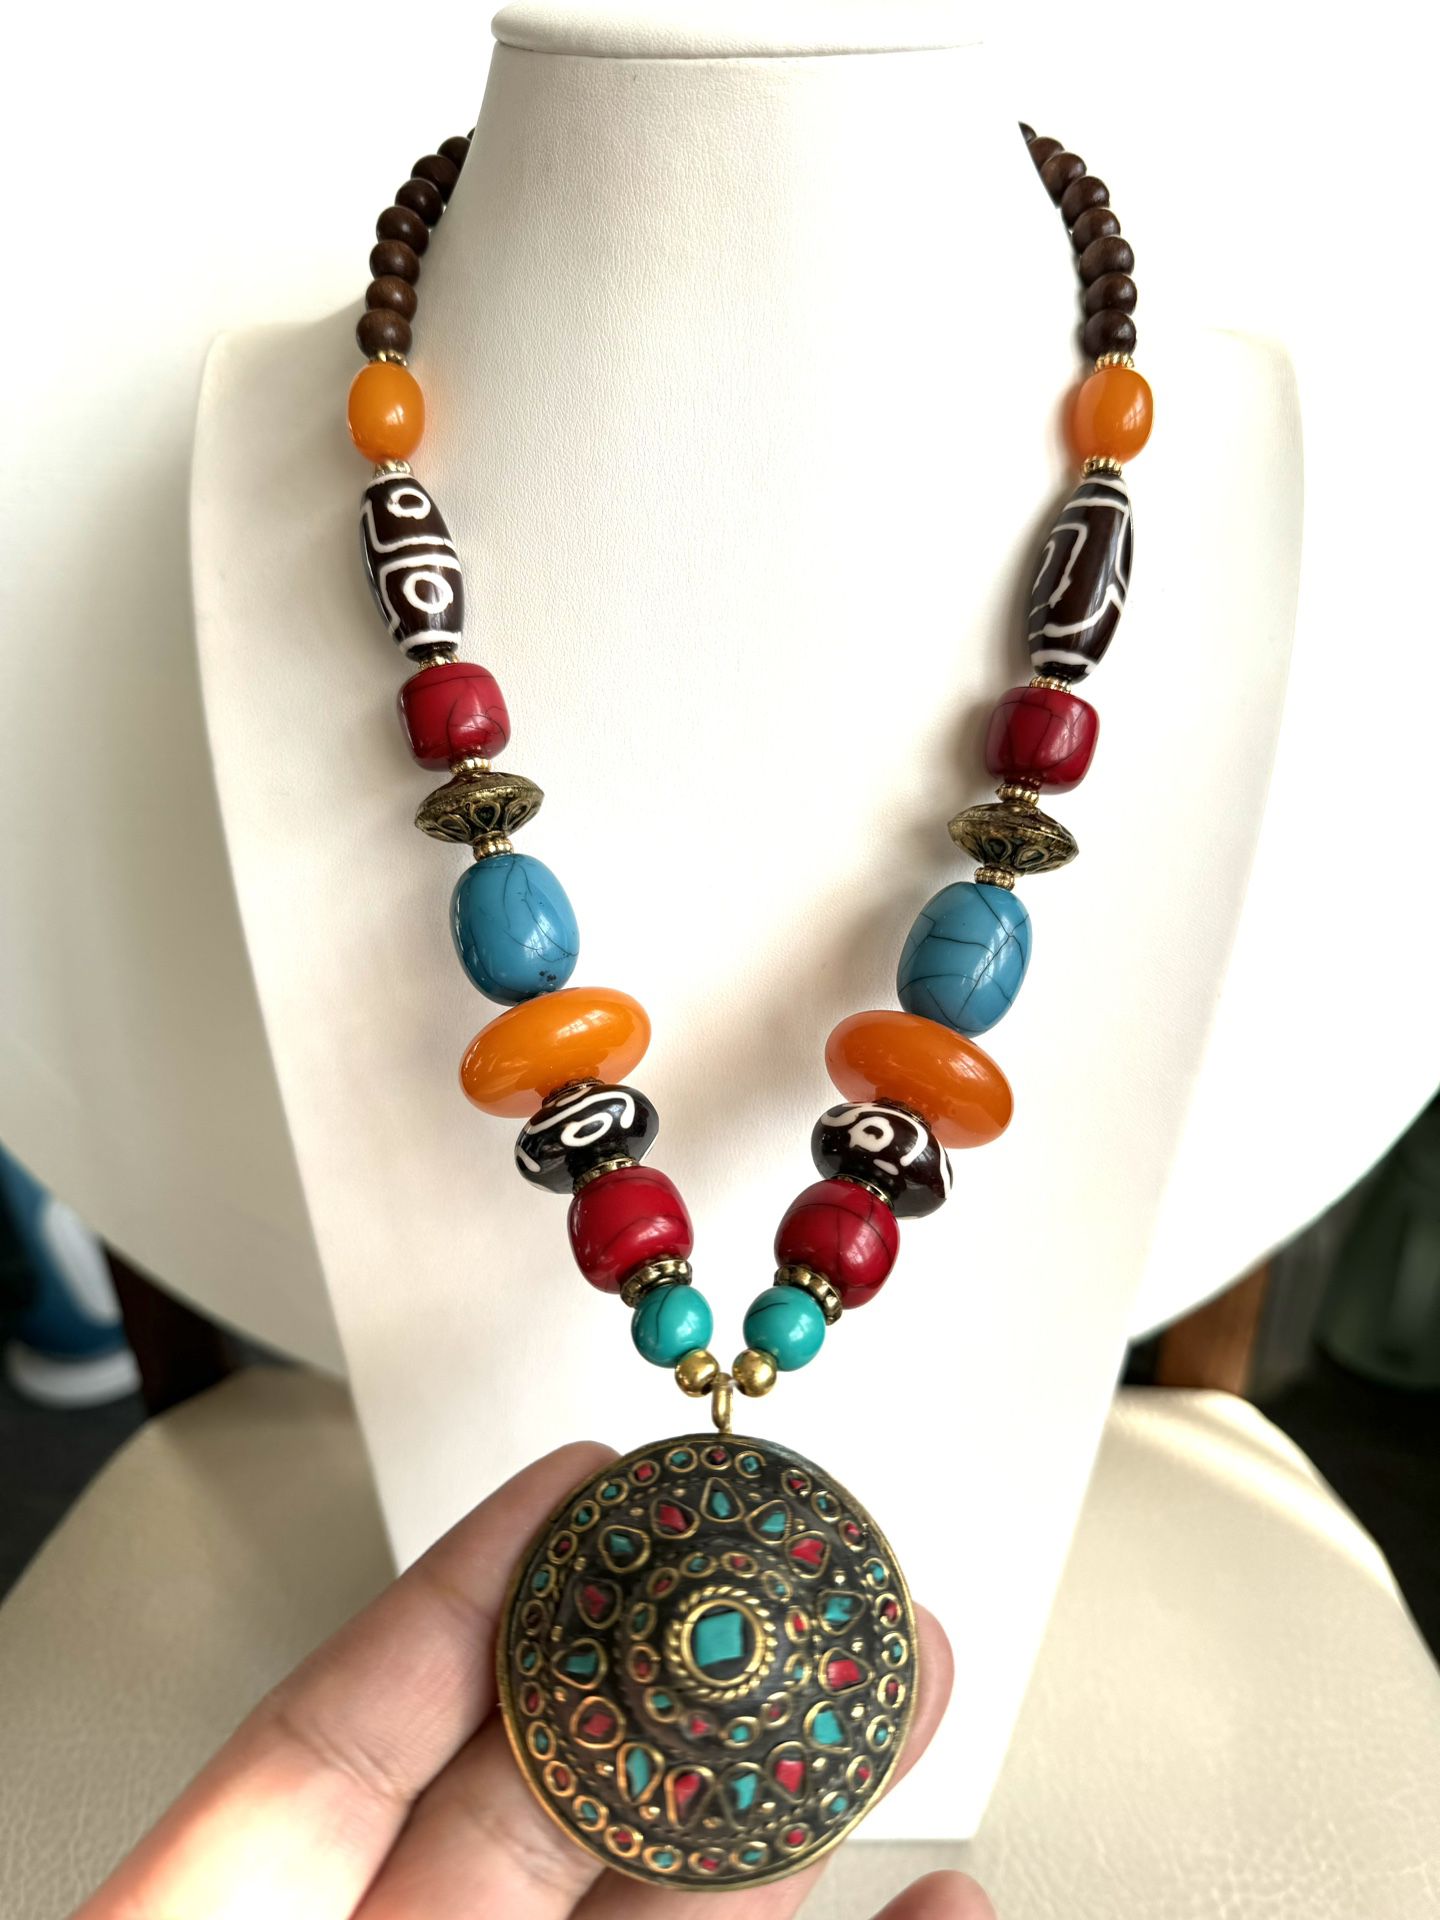 Vintage Tibetan handmade necklace with pendant inlaid with coral and turquoise 23”inch